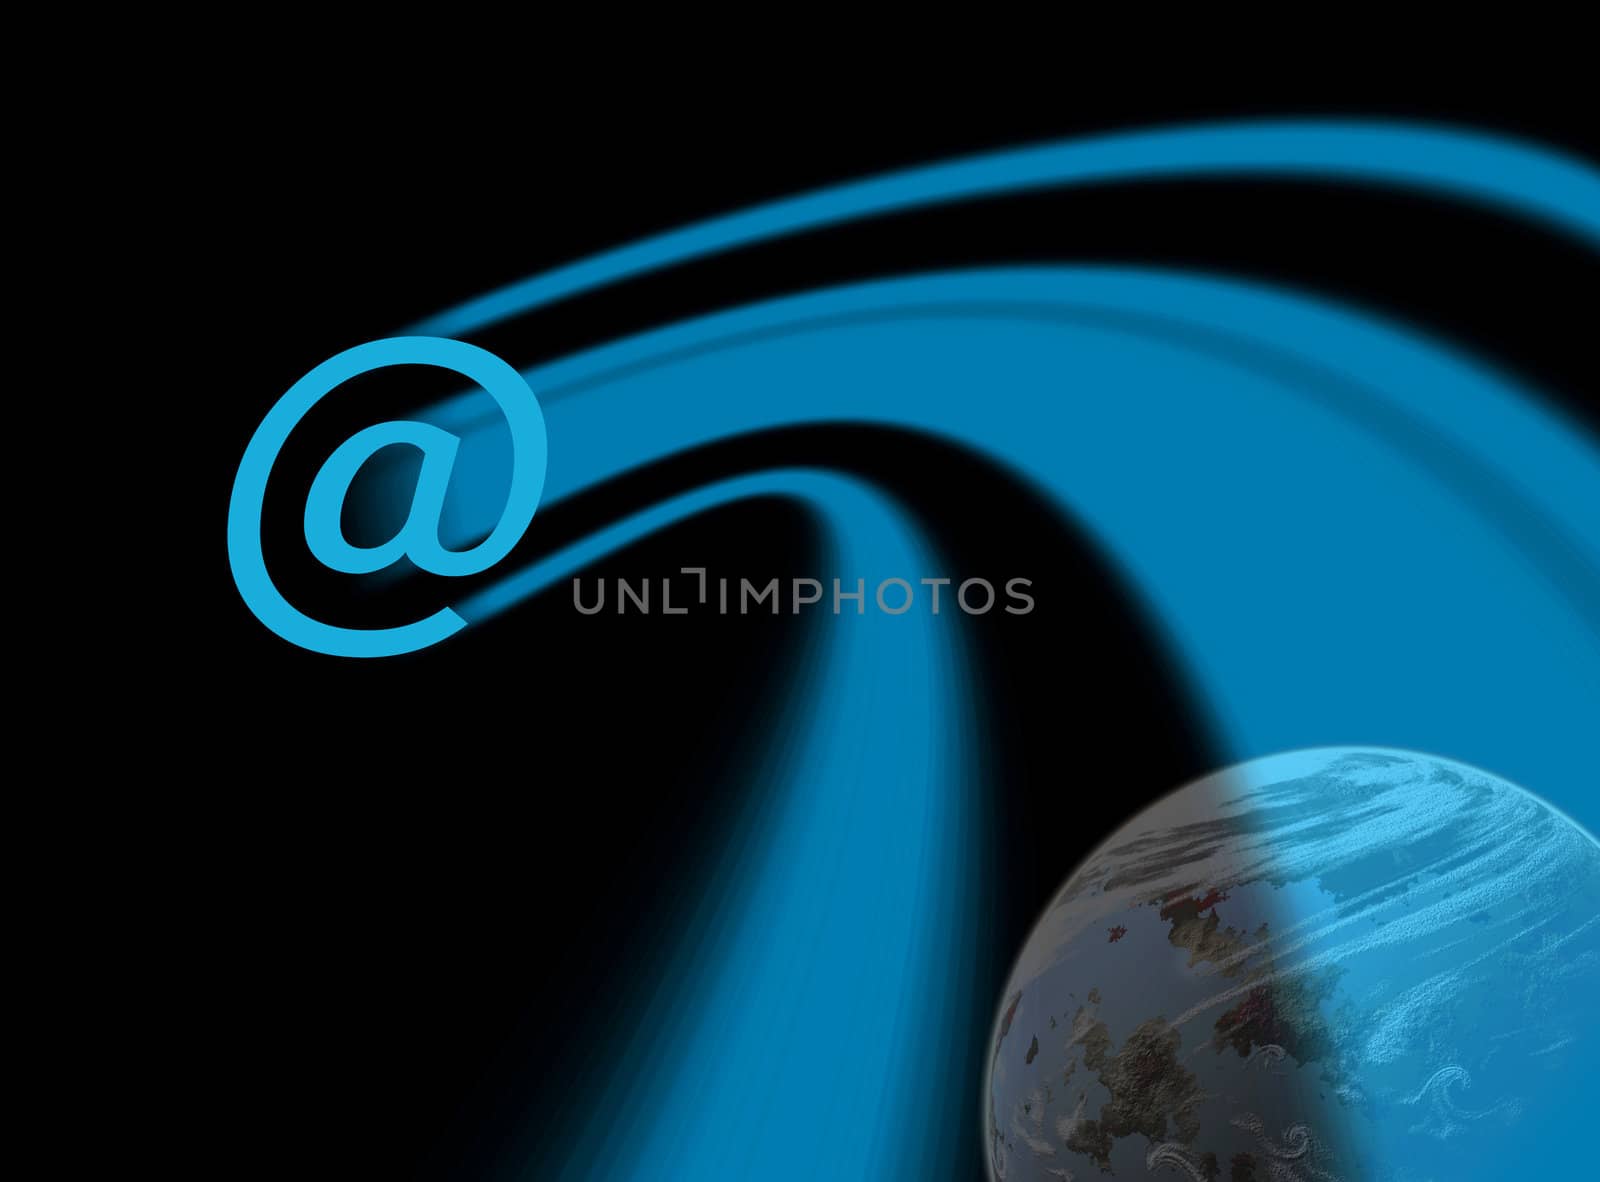 E-mail symbol with trailing blue pattern over simulated planet in background